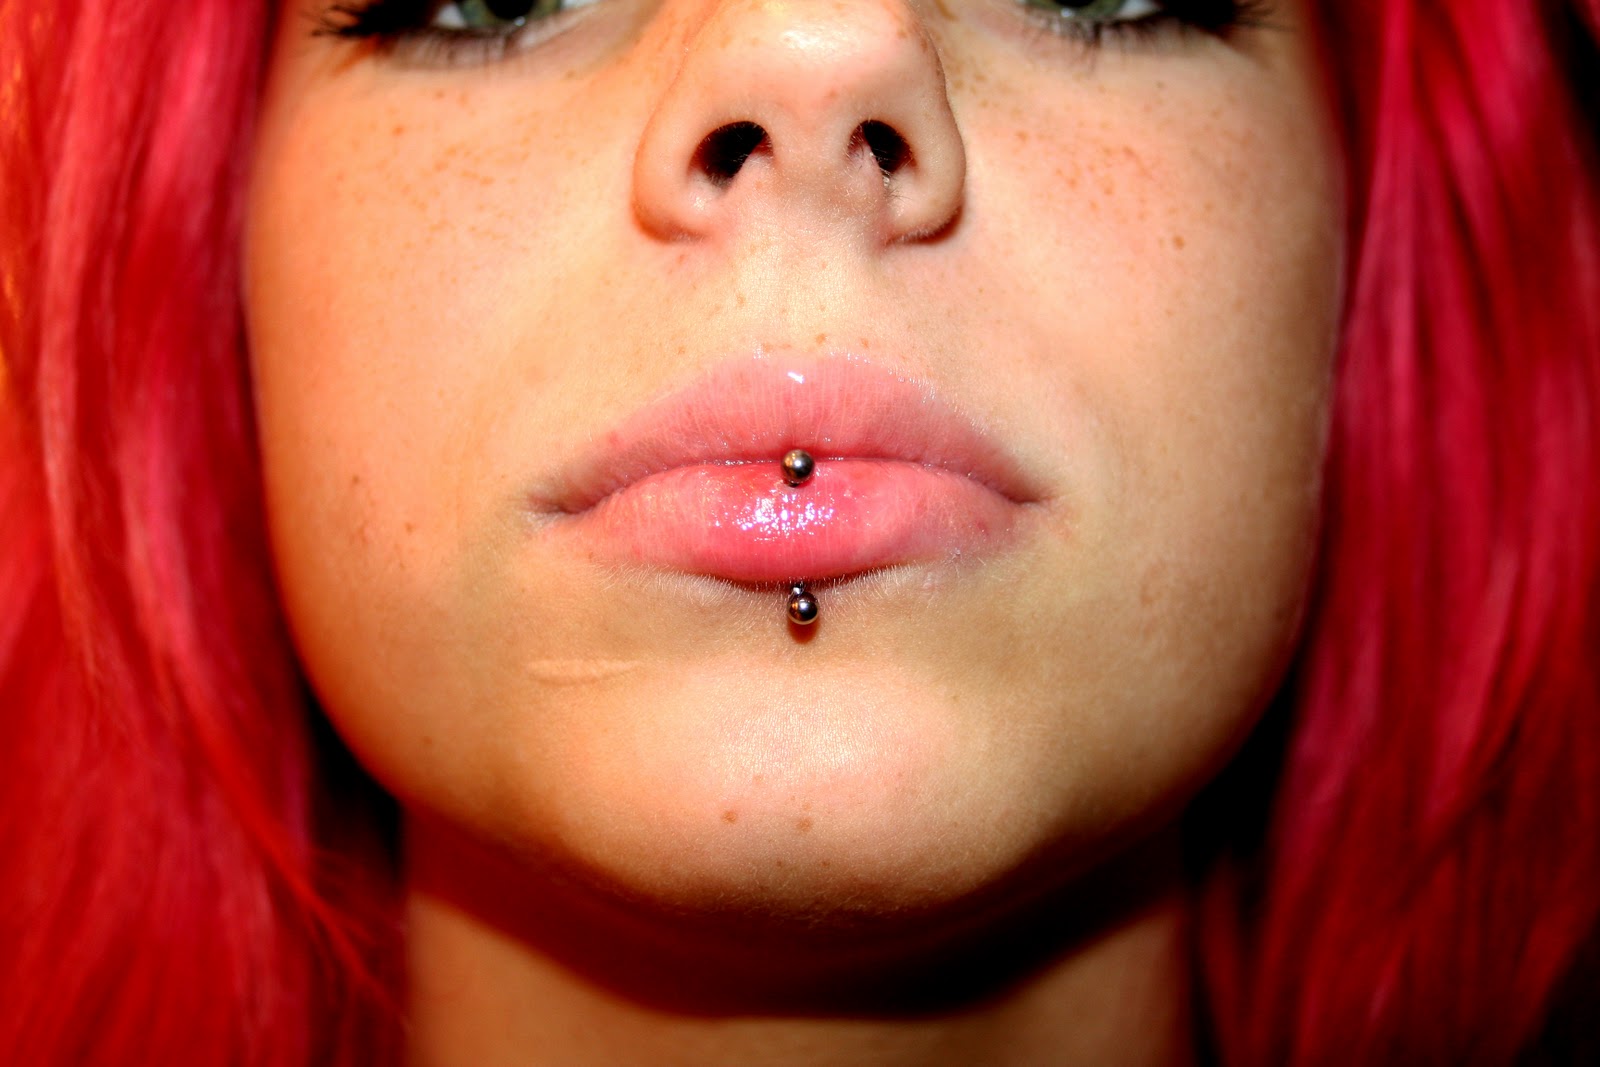 Pin Vch-piercing-pictures on Pinterest.